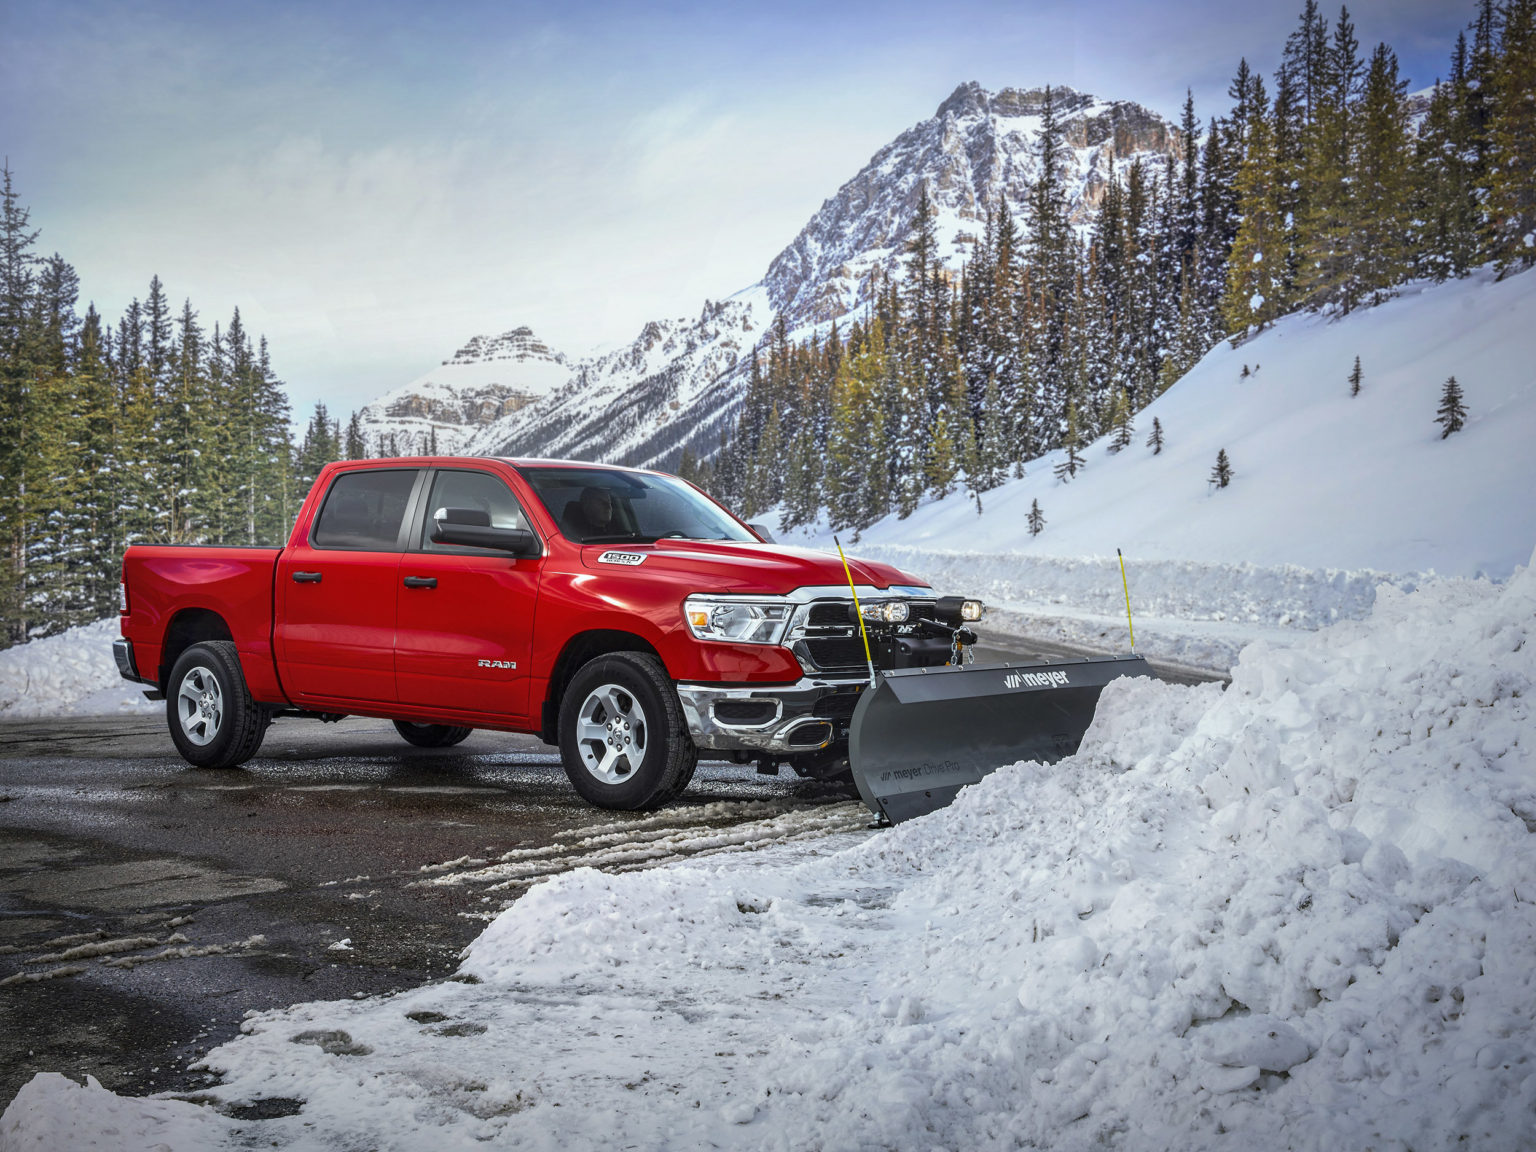 Ram is making a new Snow Plow Prep package available for the 2021 Ram 1500.